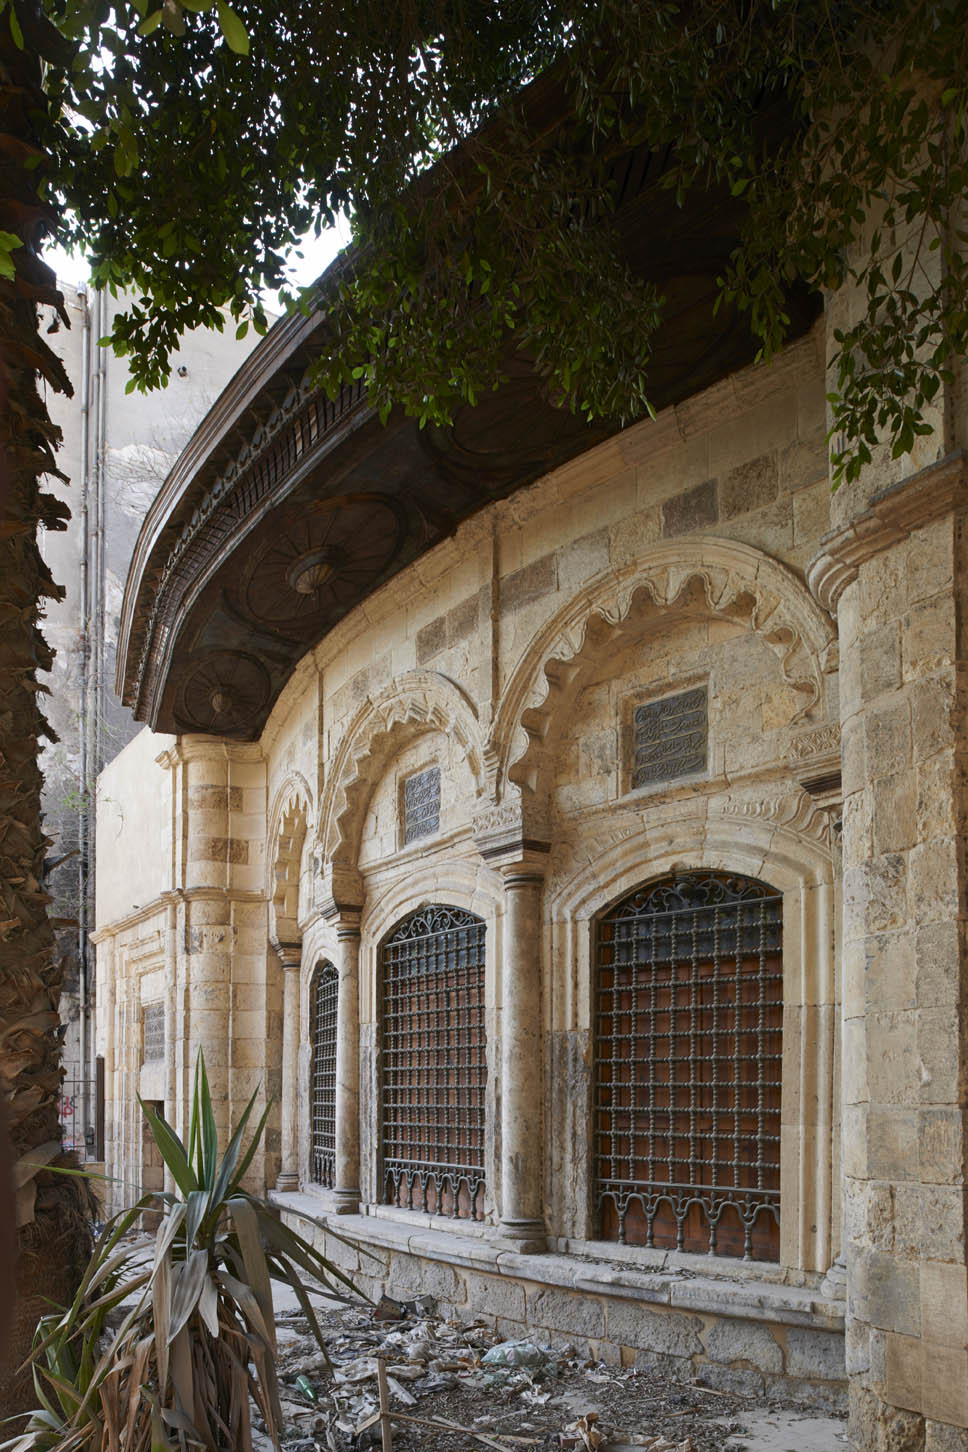 Exterior, view of the three cusped arches of the facade